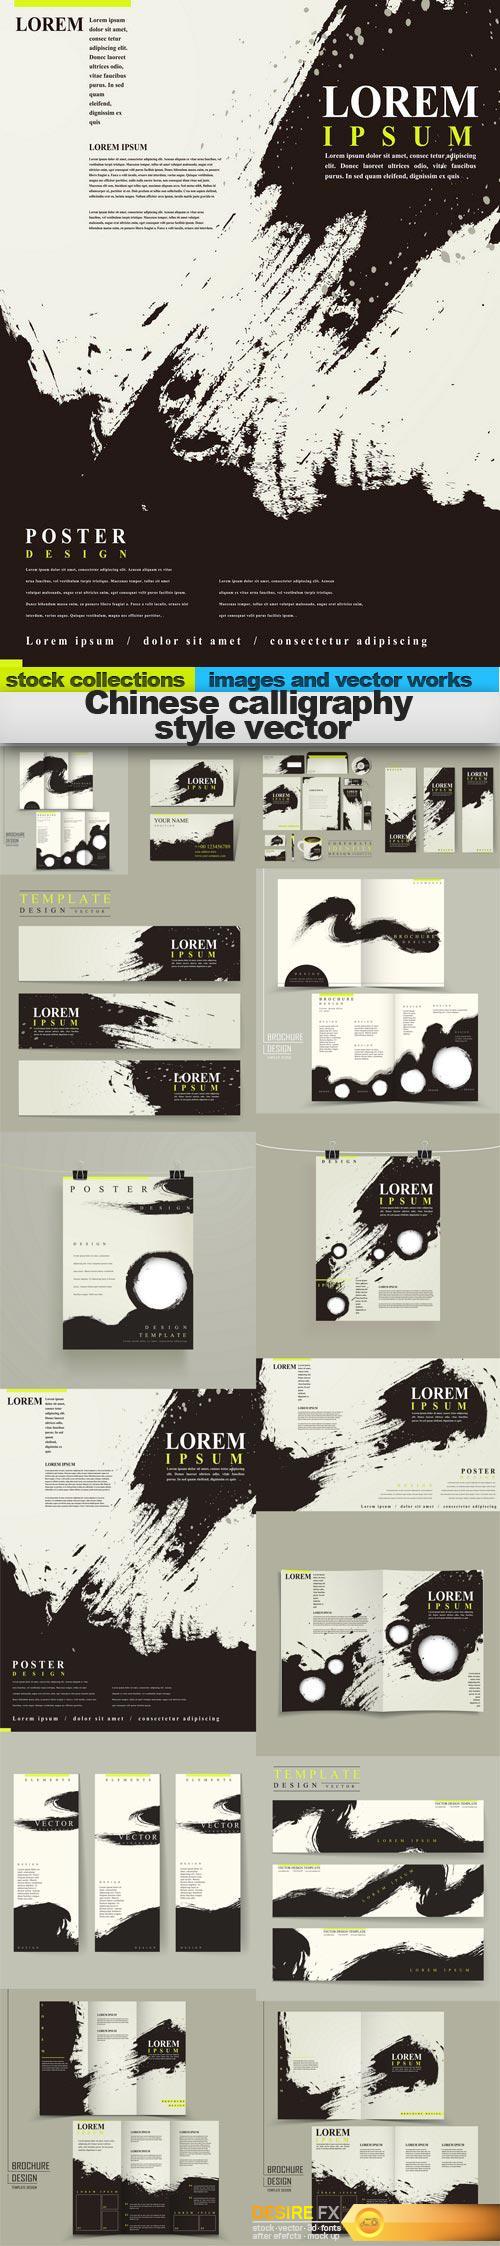 Chinese calligraphy style vector, 15 x EPS